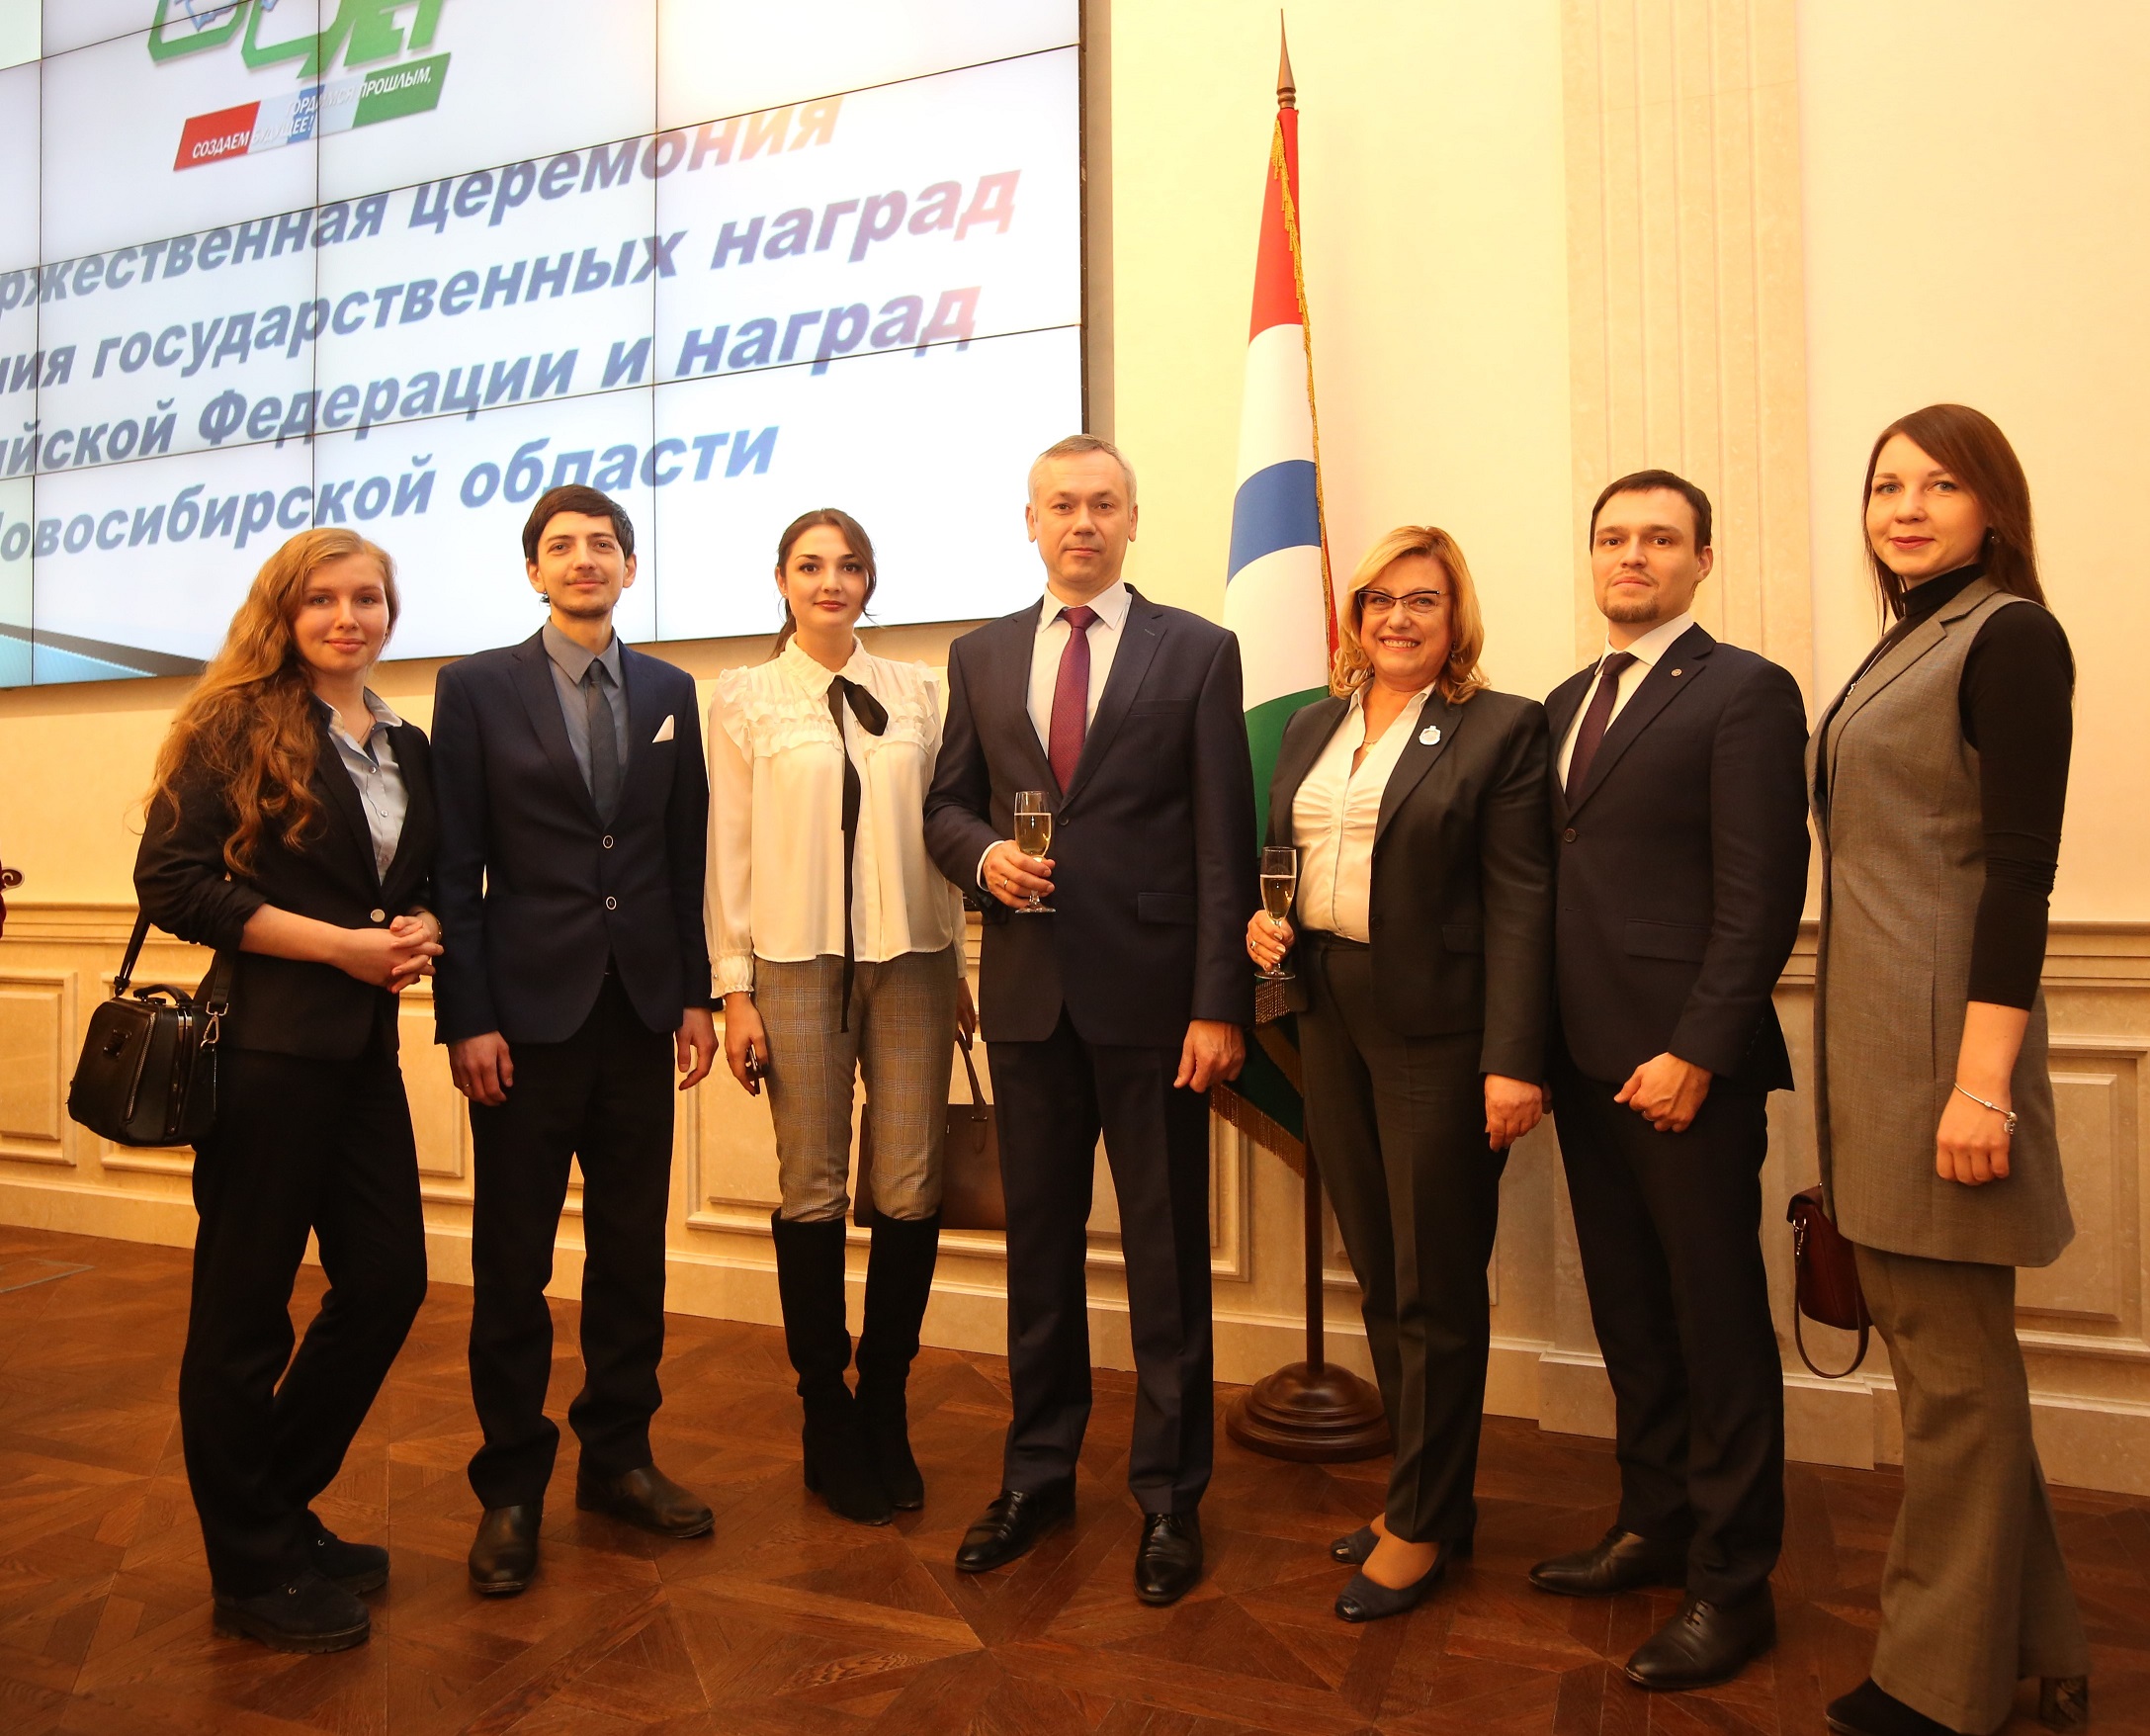 Lexprof manager partner Tatyana Goncharova is Honored Lawyer of the Novosibirsk region